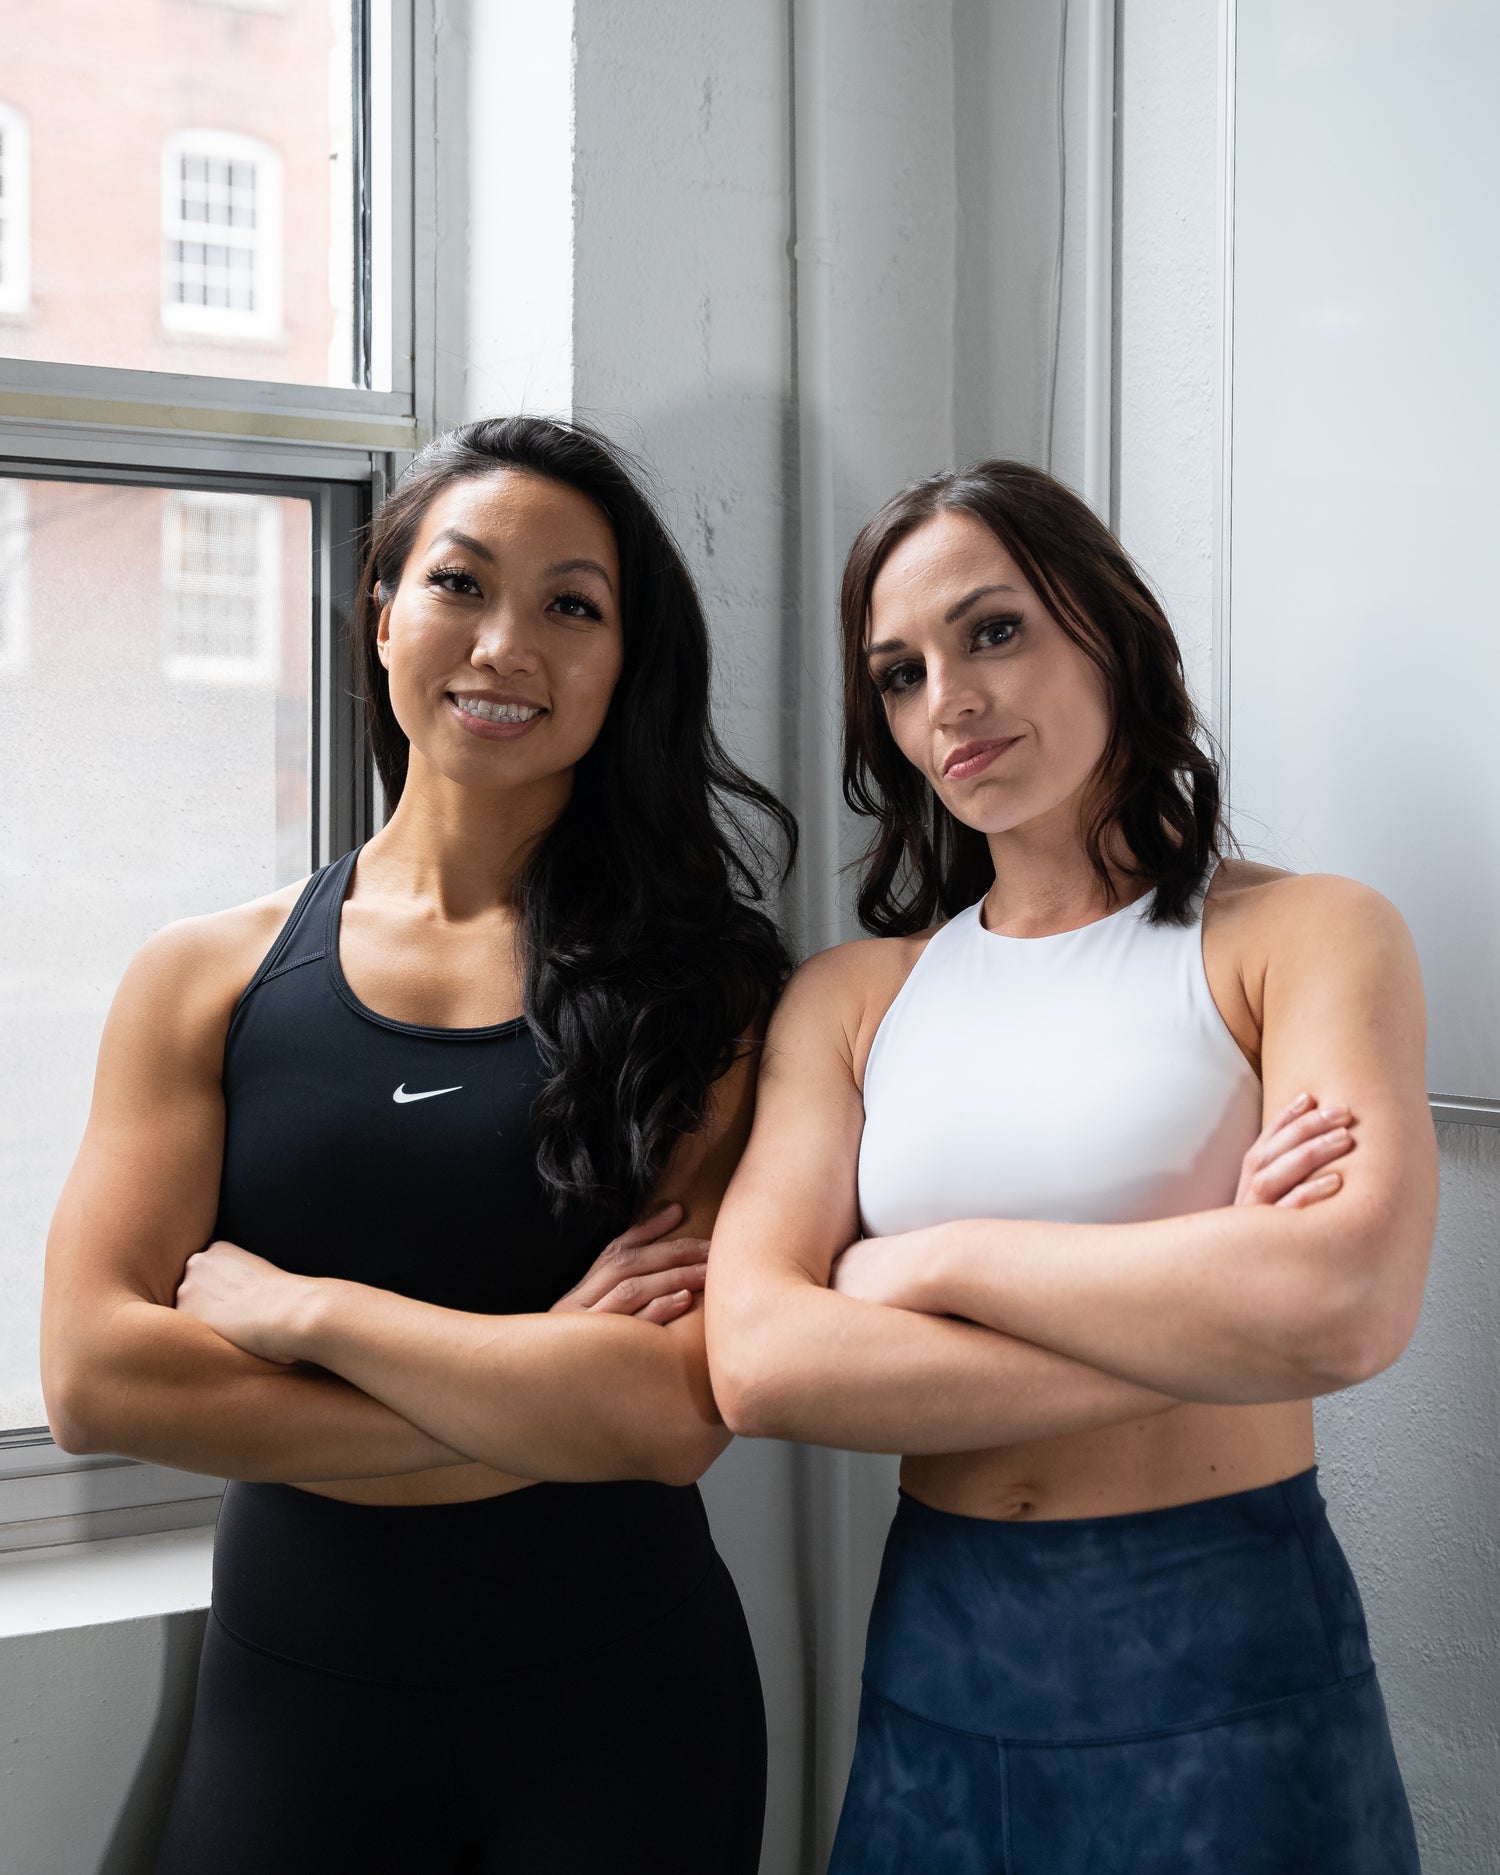 Two female personal trainers standing by a window with arms crossed. Personal trainer one is wearing a black sports bra and leggings. Personal trainer two is wearing a white sports bra and blue leggings.